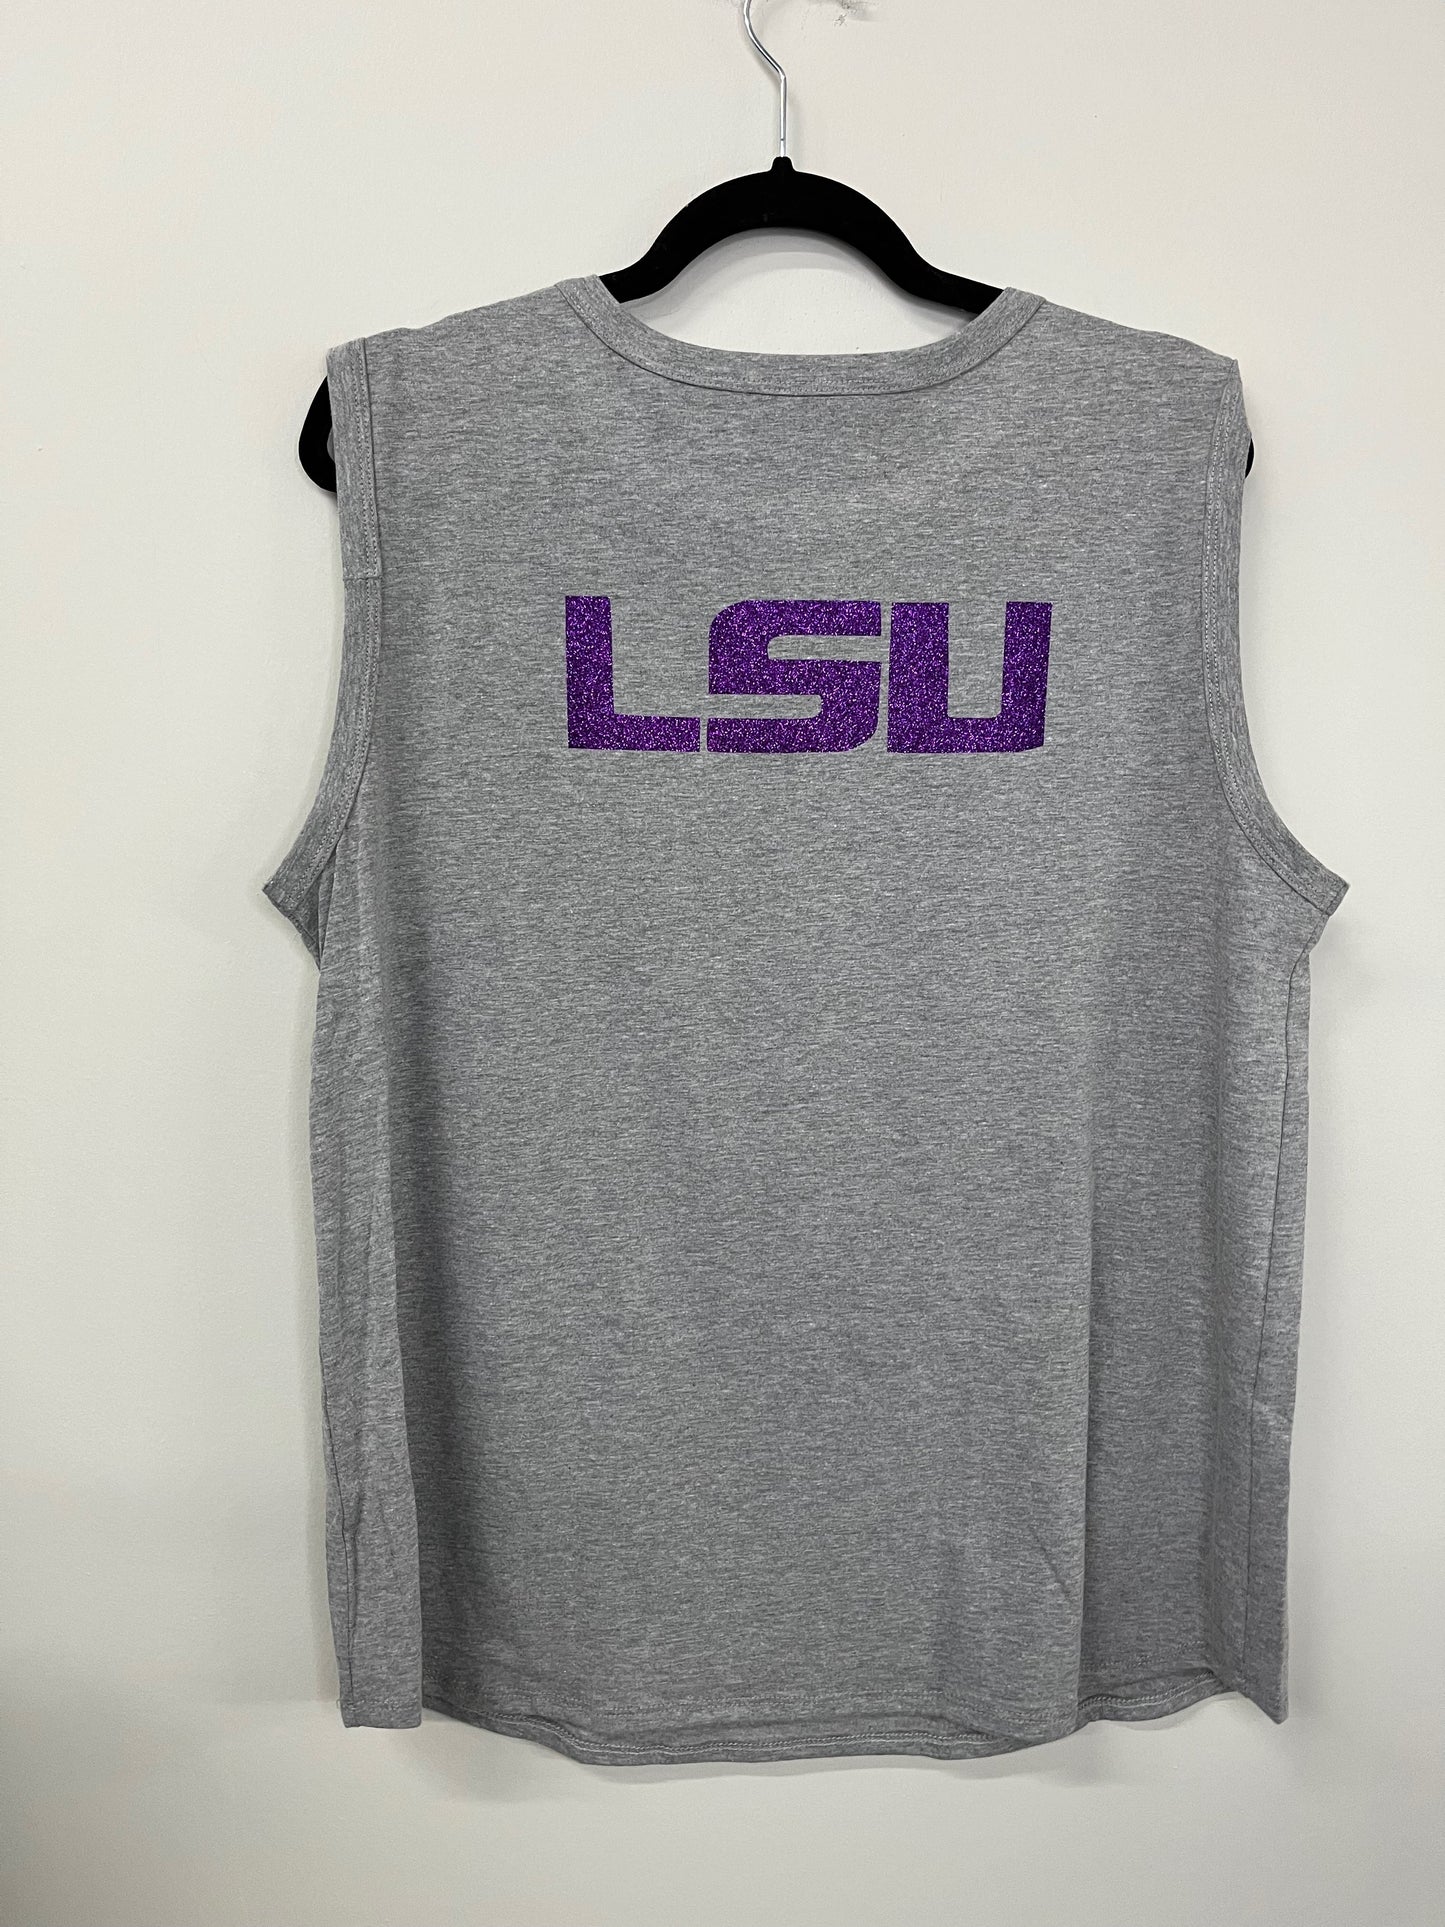 Tank, Muscle Distressed Gray, Purple Tiger Face & LSU on back